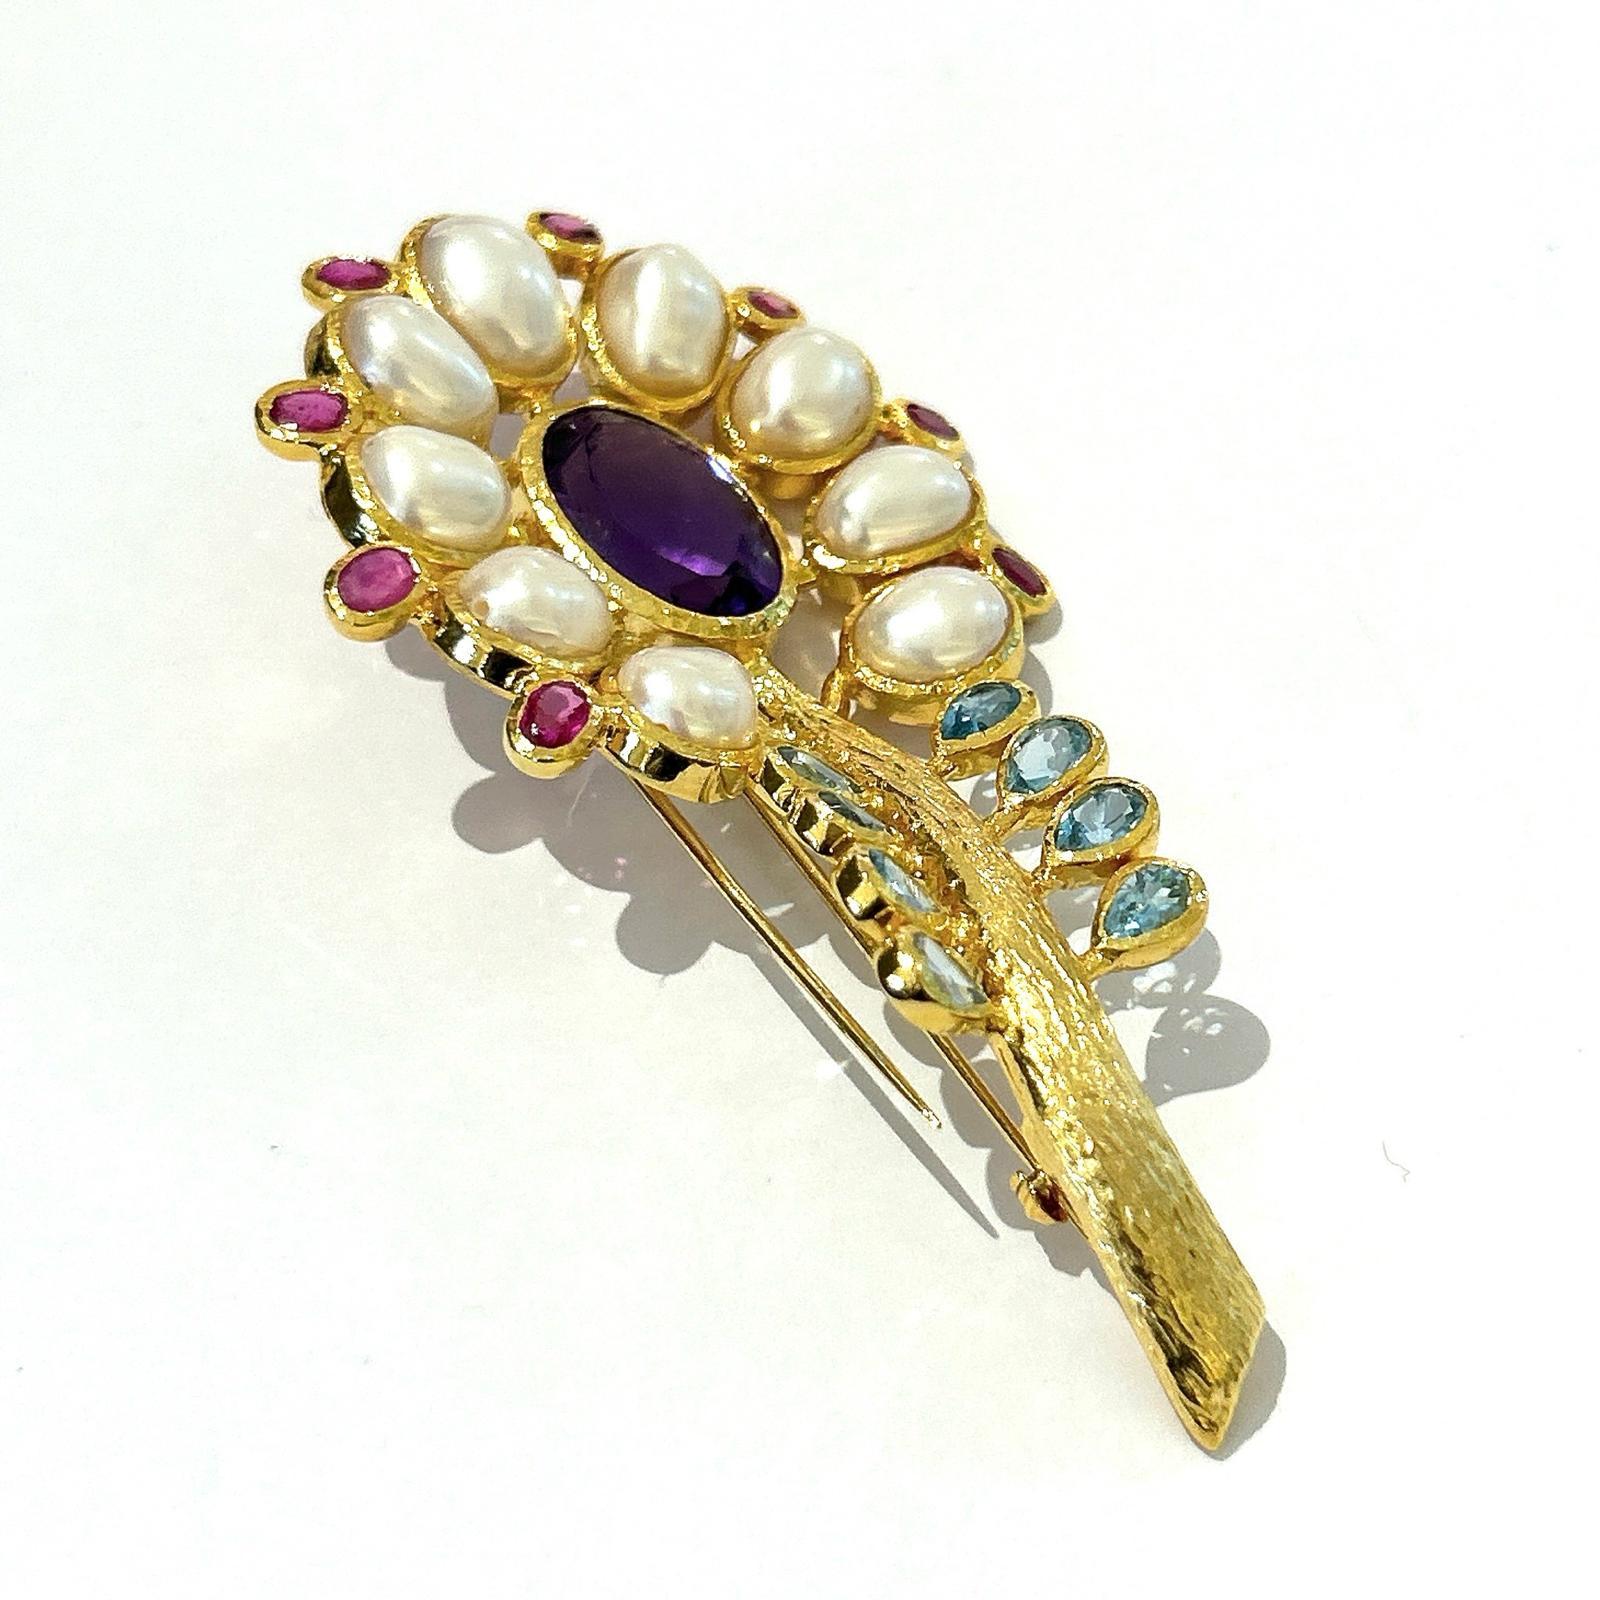 Bochic “Orient” Amethyst, Topaz, Pearl & Ruby Brooch Set In 18K Gold & Silver 

Natural Red Ruby, Oval shape - 3 carat 
Natural Blue Topaz and Ametyist
16 carat
White Button Pearls 

The Brooch is from the 